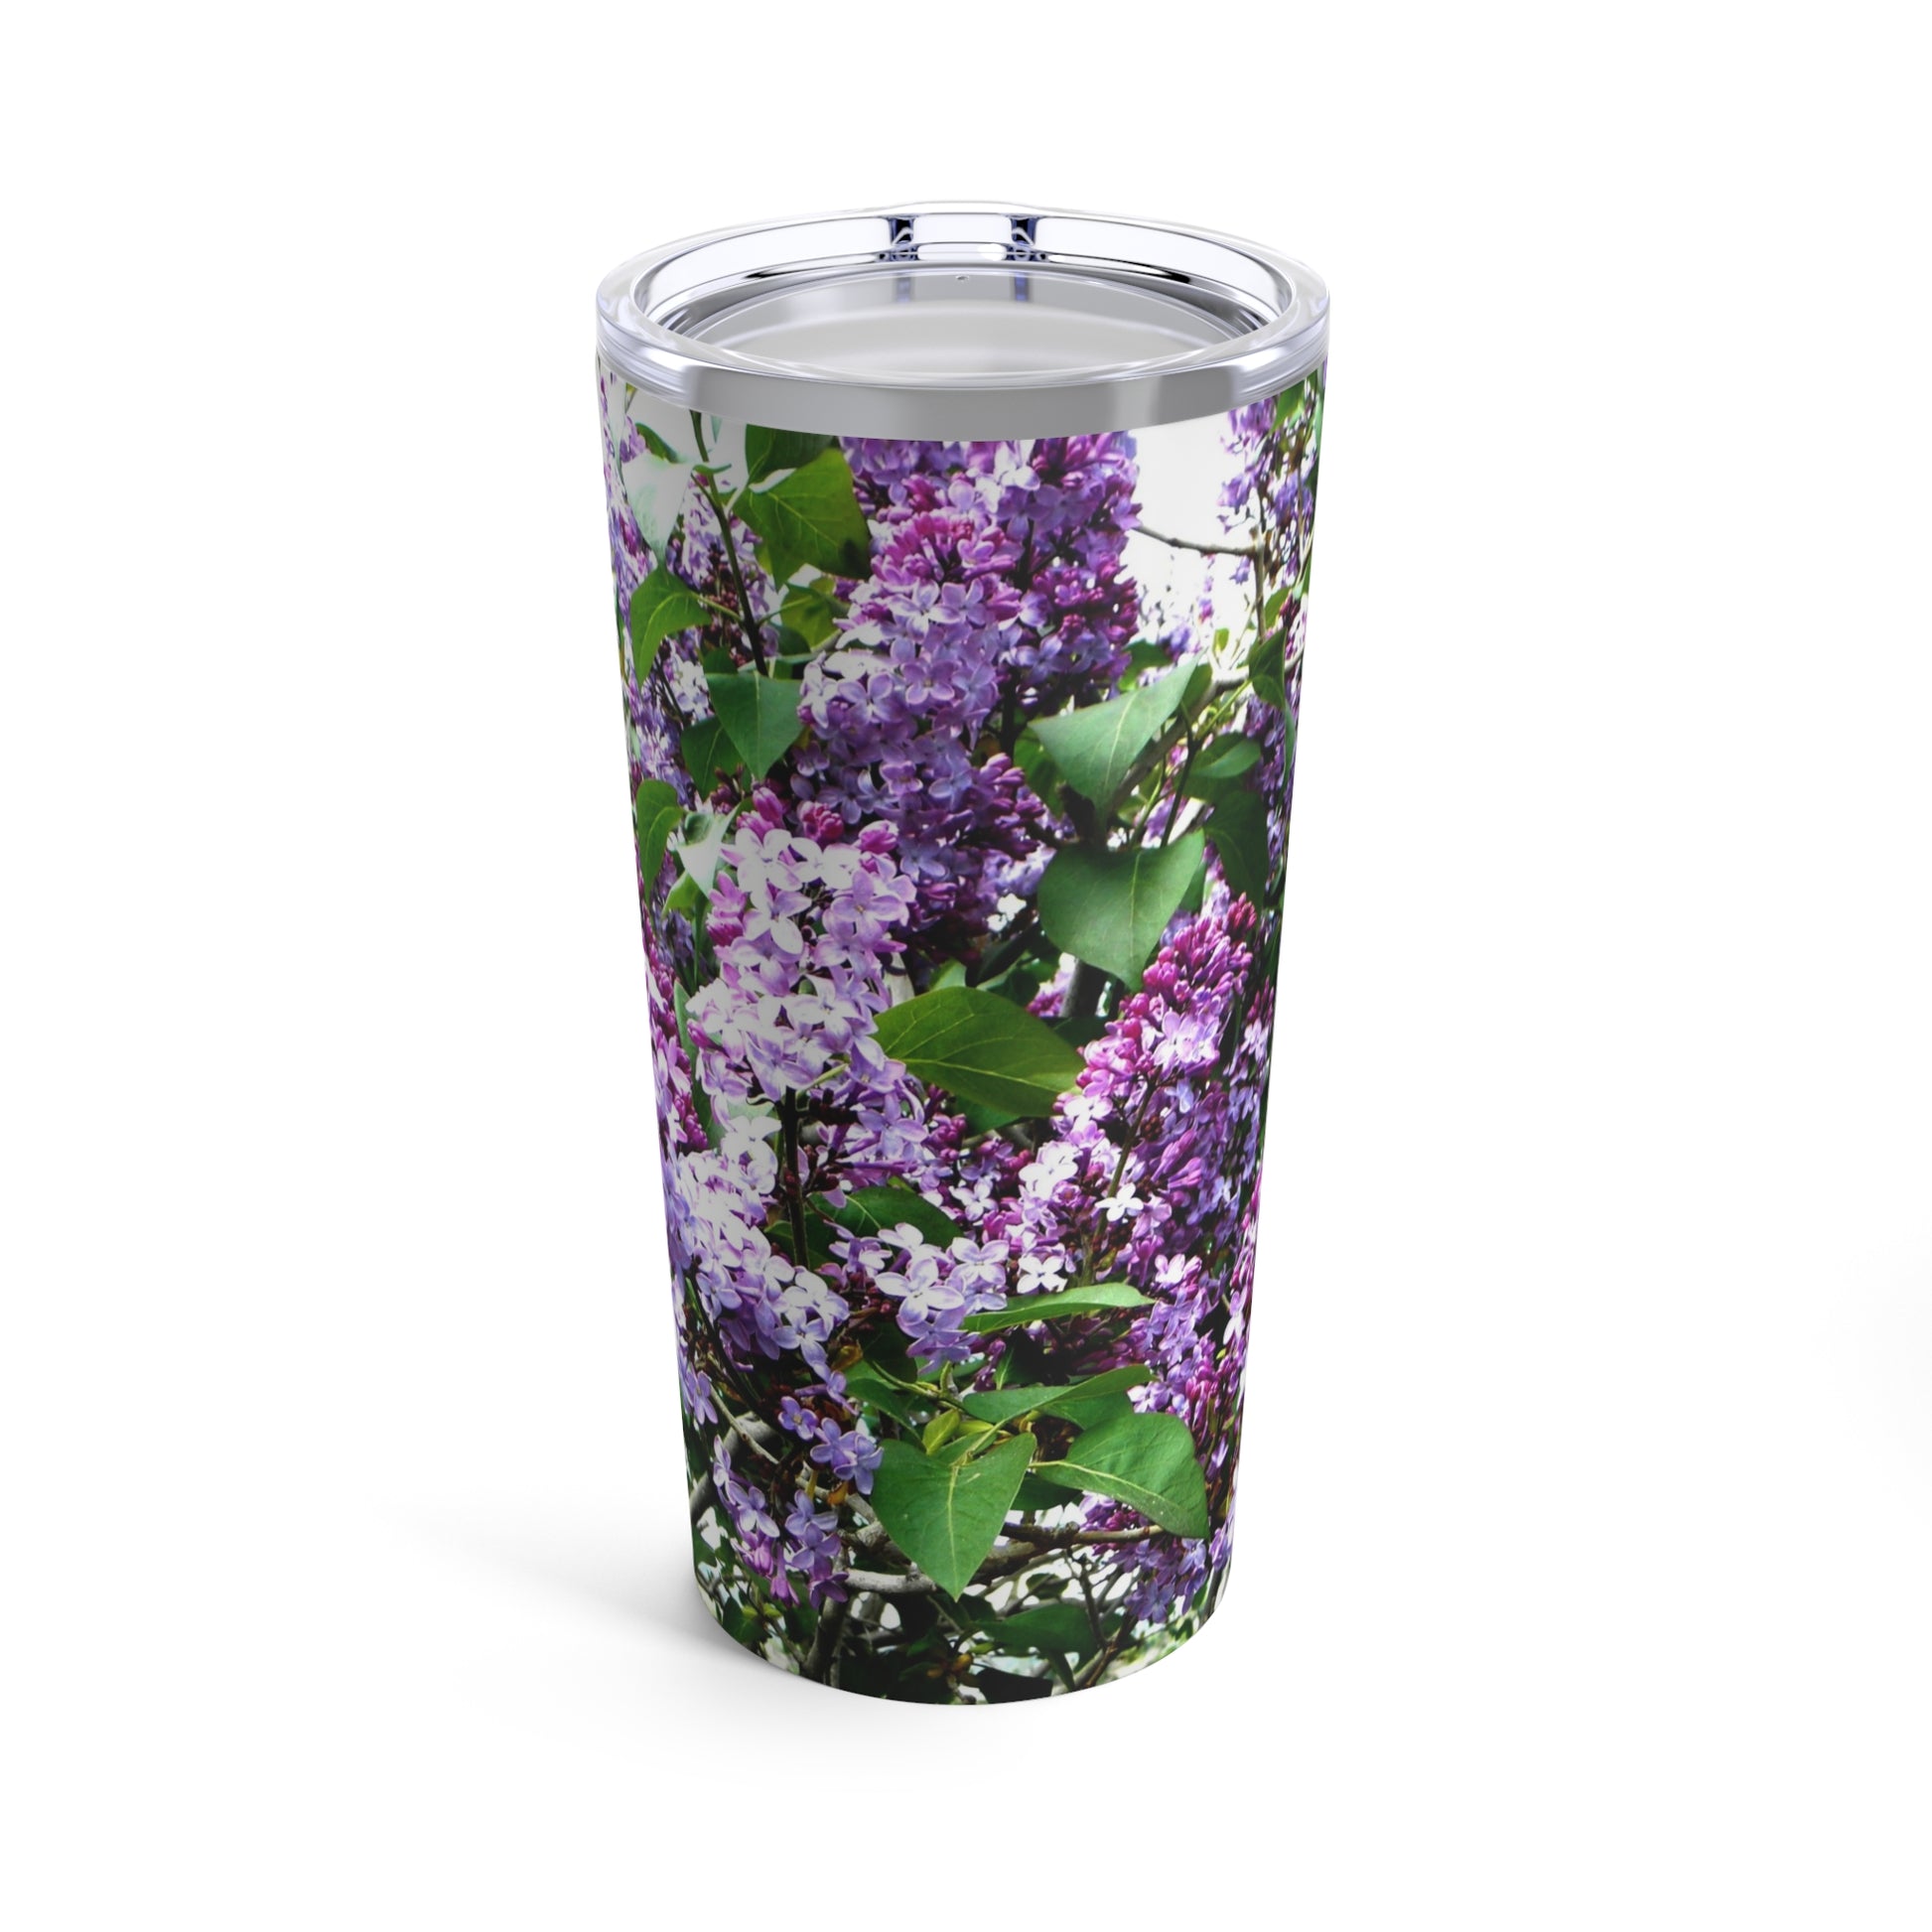 A Printify Purple Lilacs Tumbler: 20 oz.; Stainless steel; Insulated featuring photography by Pam Ponsart.